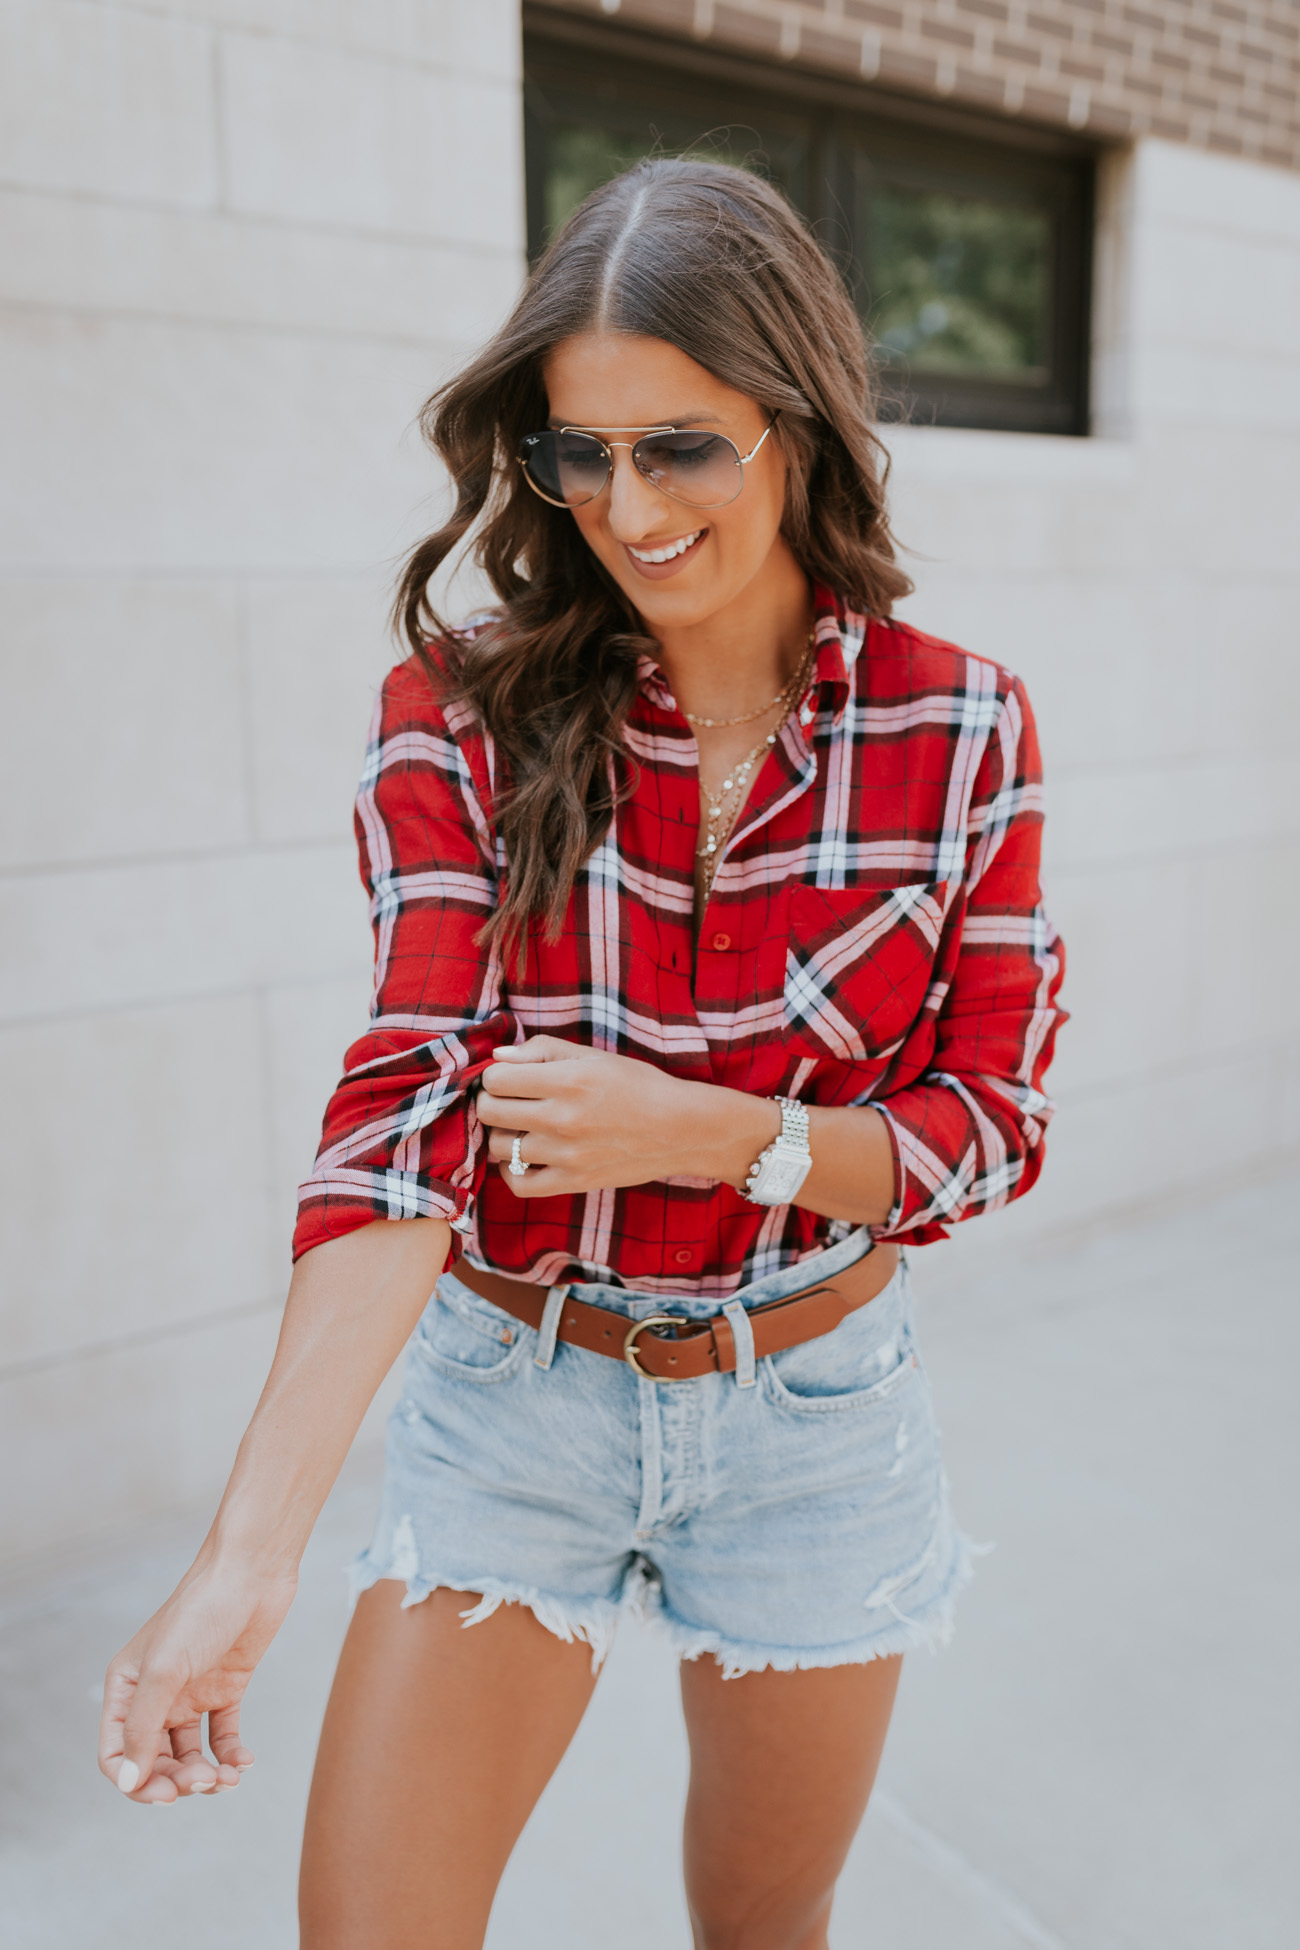 affordable plaid shirt, plaid tops, plaid shirt nsale, 2018 nordstrom anniversary sale public access, shop nordstrom, nordstrom shoes, nordstrom dresses, nordstrom handbag sale, nordstrom anniversary sale dates, Nordstrom Anniversary Sale 2018, nordstrom anniversary sale picks, nordstrom anniversary sale catalog, sale picks for nordstrom anniversary sale 2018, information on nordstrom anniversary sale, nordstrom credit card, nordstrom debit card, nordstrom rewards, nordstrom sale, nordstrom anniversary sale finds, nsale finds, nsale picks, nike on sale, cute fall outfit, fall style, fall inspo, fall sale // grace wainwright a southern drawl